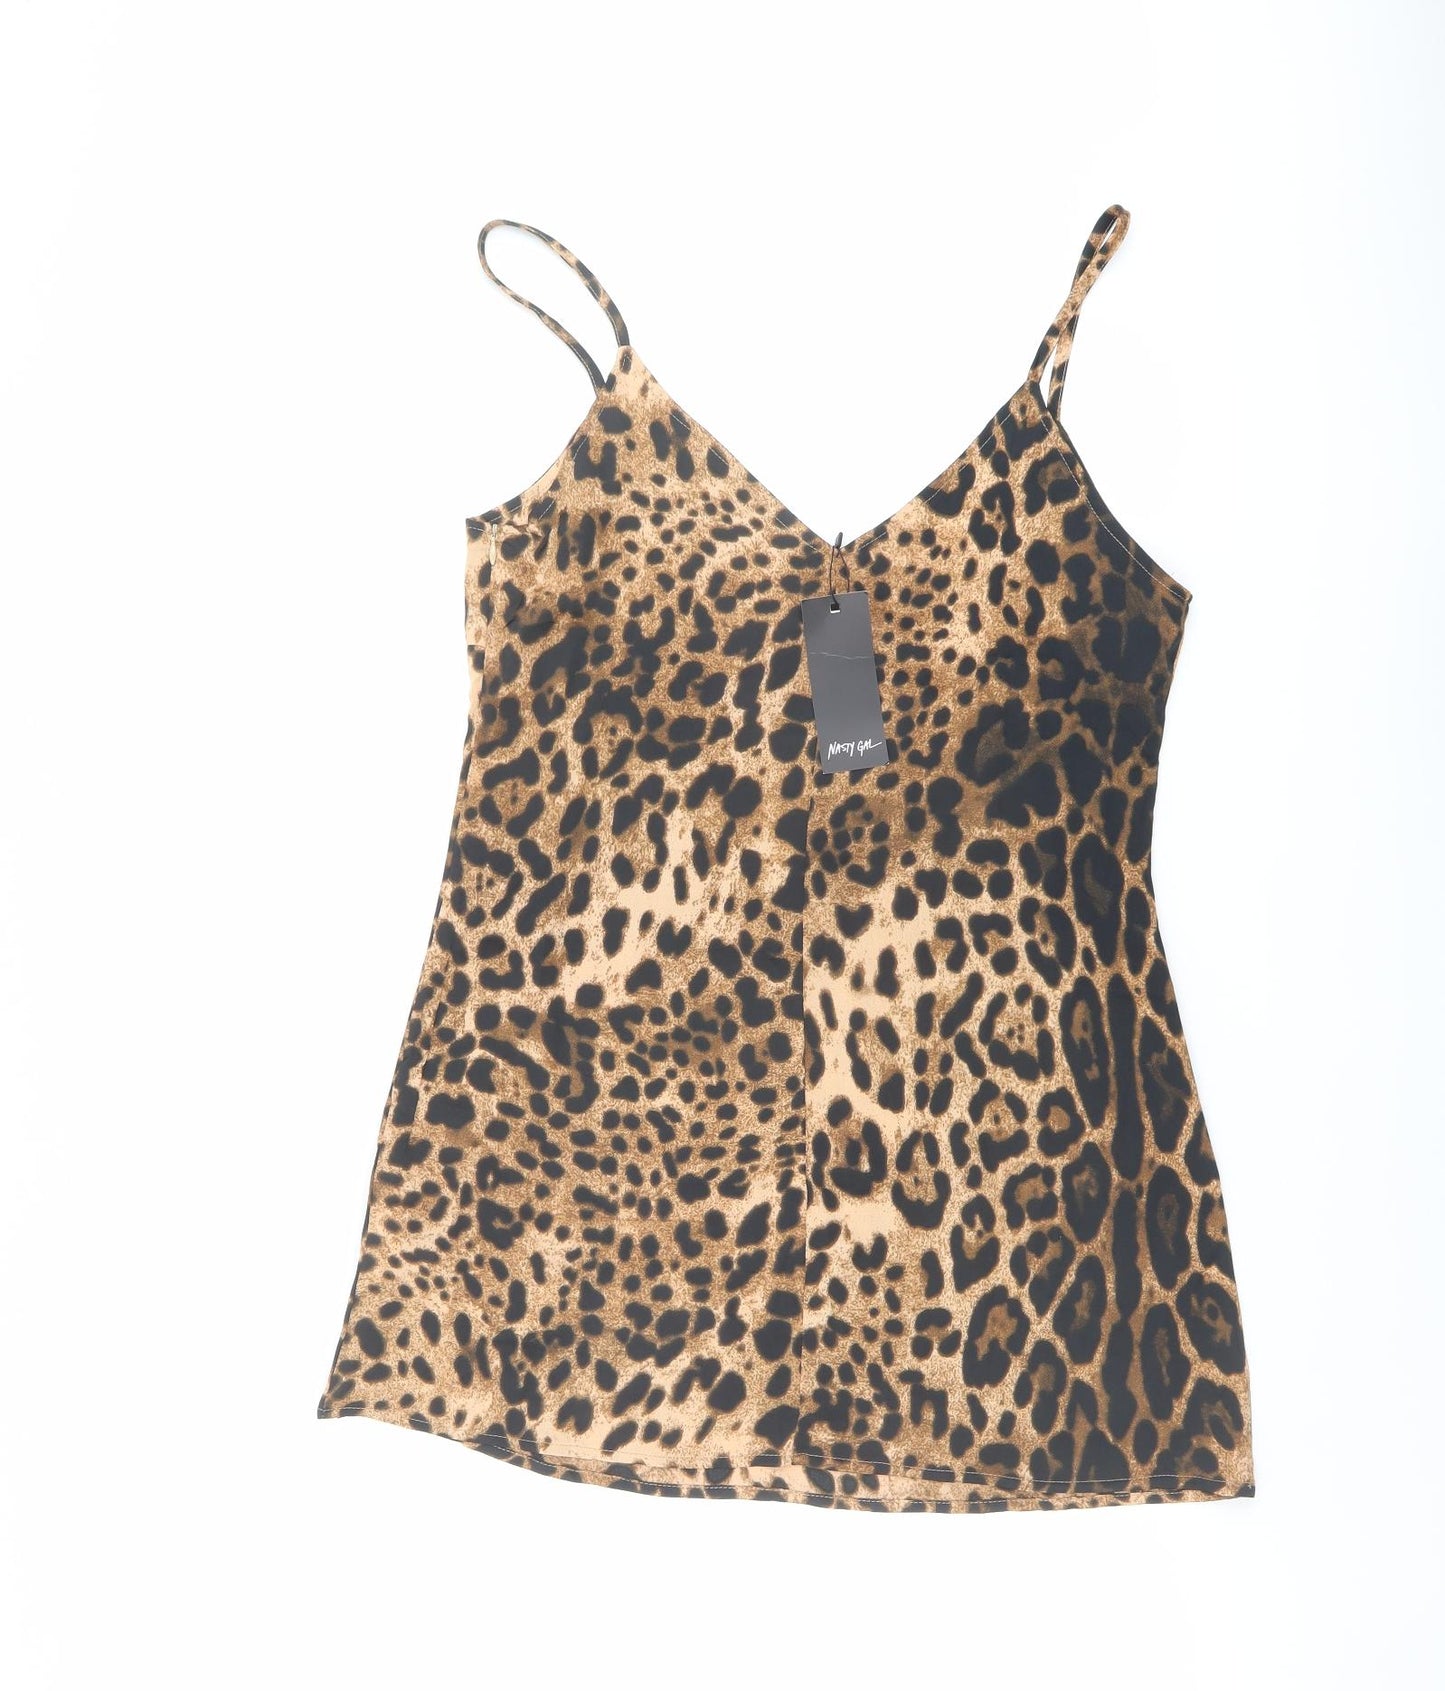 Nasty Gal Womens Brown Animal Print Polyester Camisole Tank Size 10 V-Neck - Leopard Print